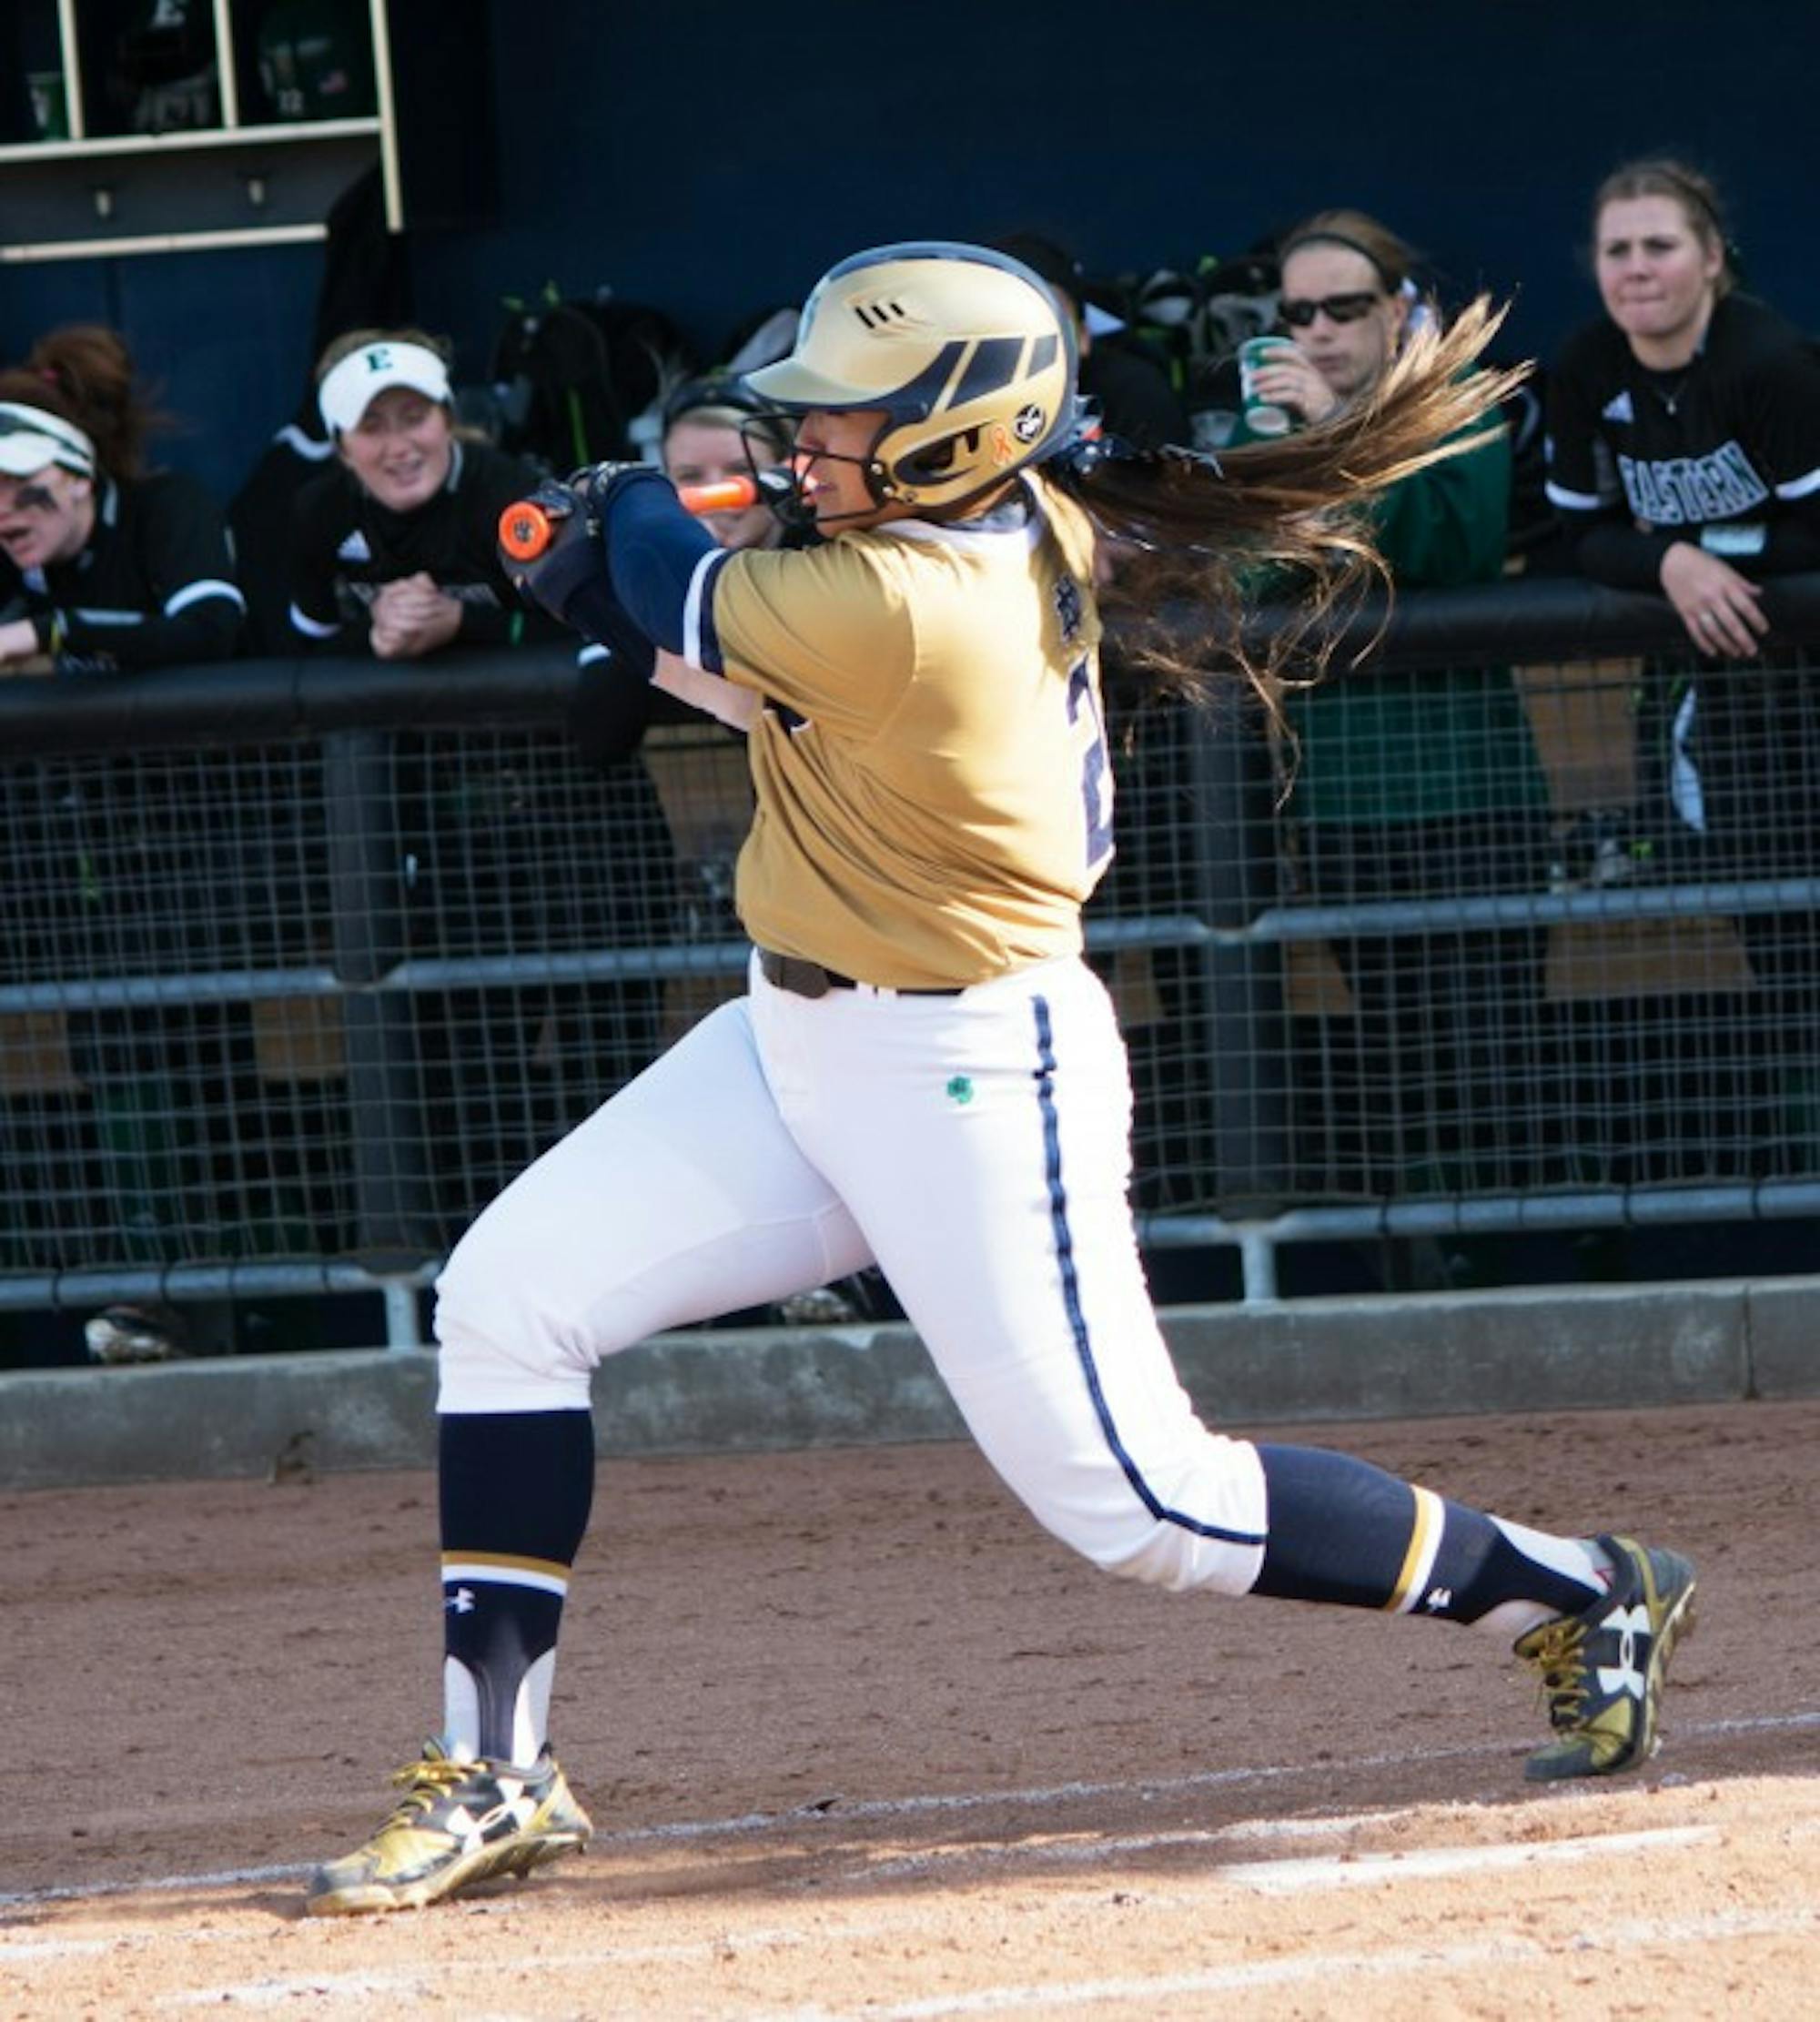 Irish senior first baseman Micaela Arizmendi swings at a pitch during Notre Dame’s 10-2 win over Eastern Michigan on March 22.